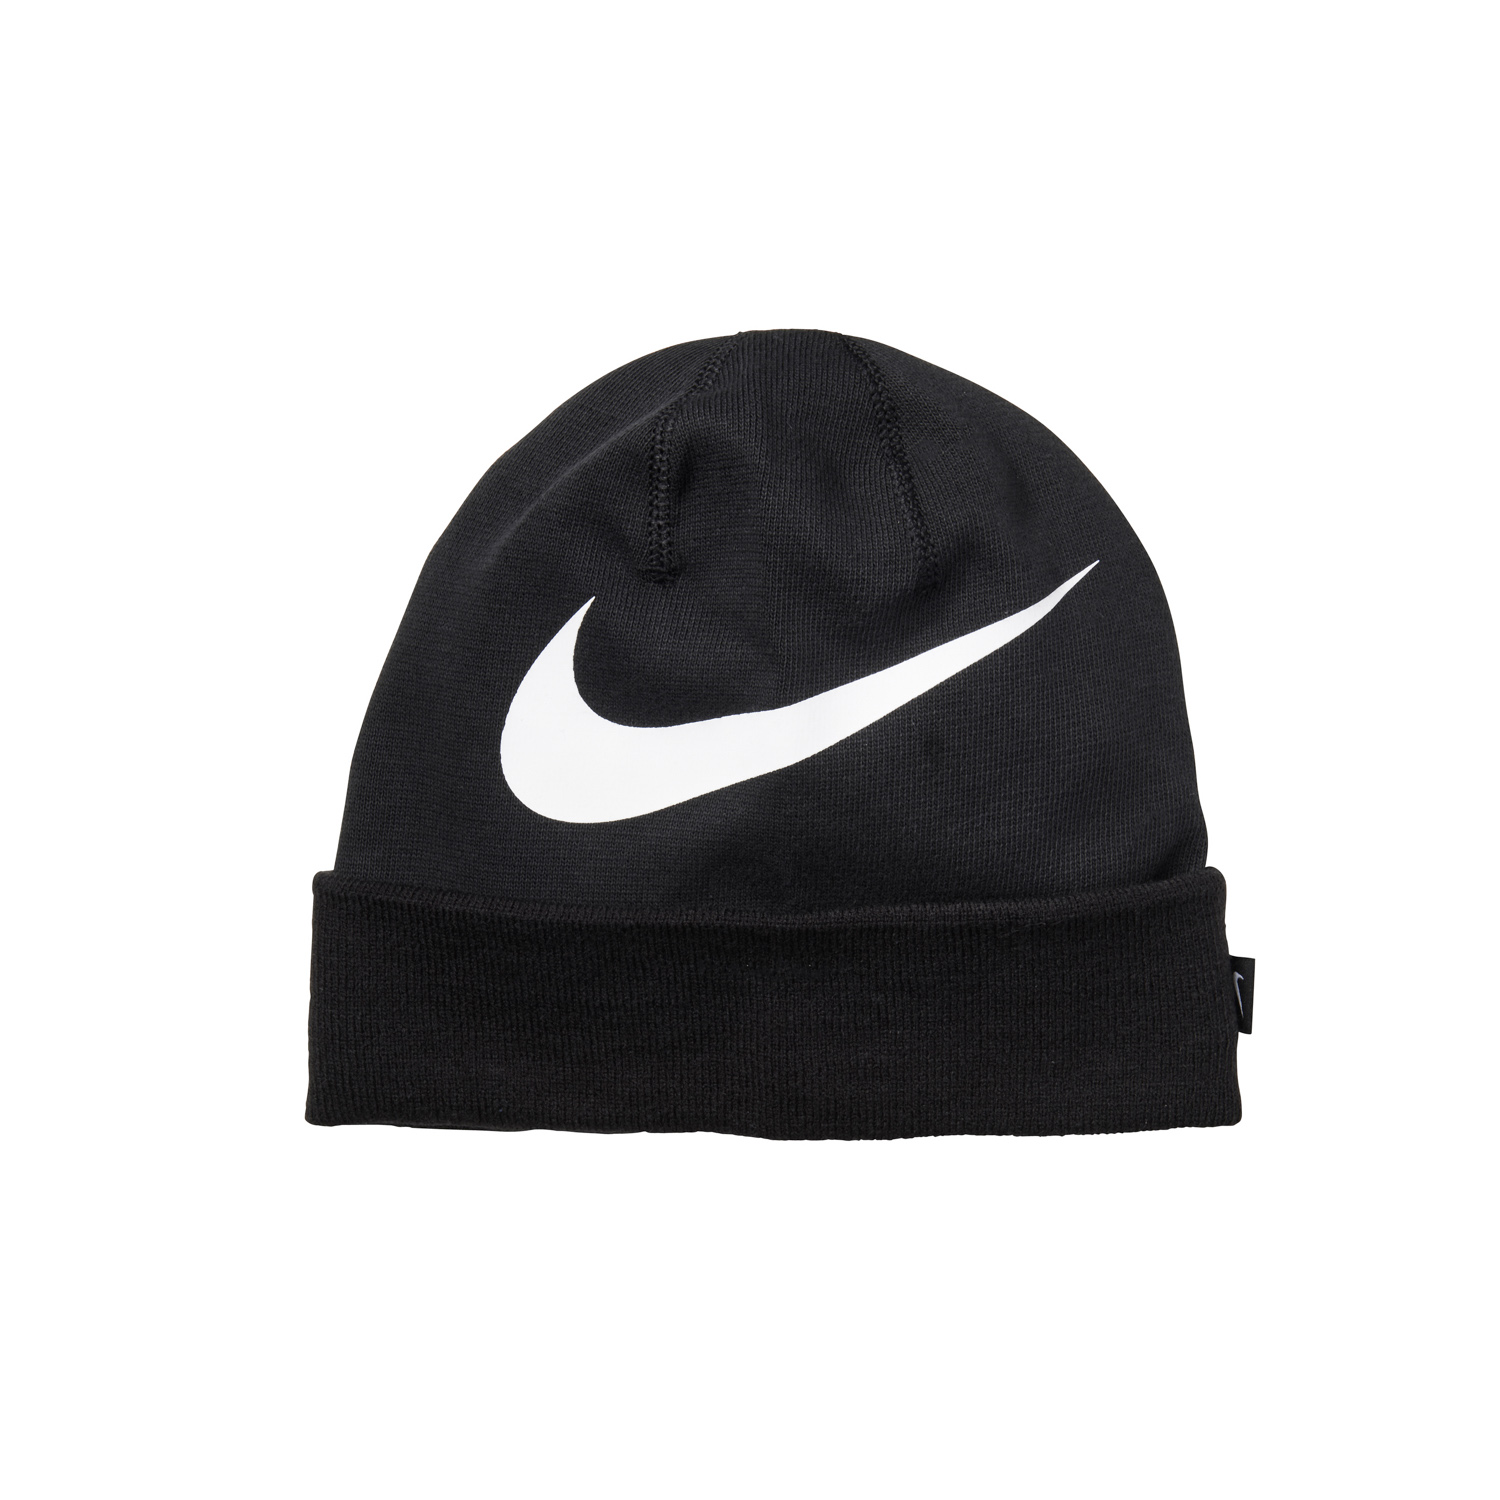 nike winter cap with ear protector